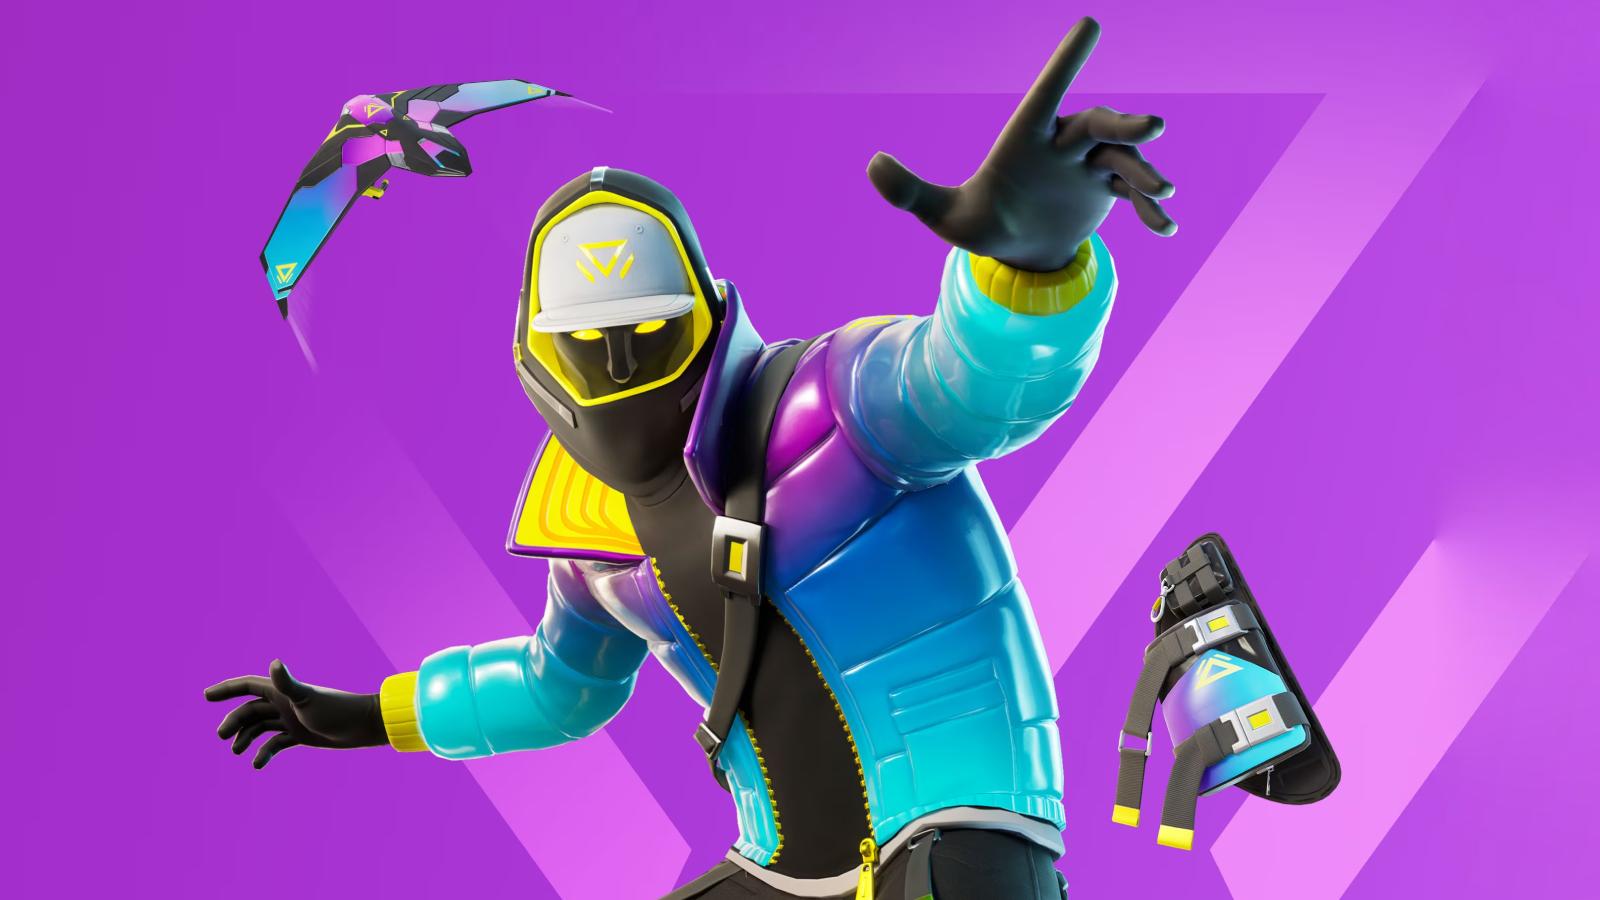 How to Get the PS Plus Exclusive Fortnite Skin on PC